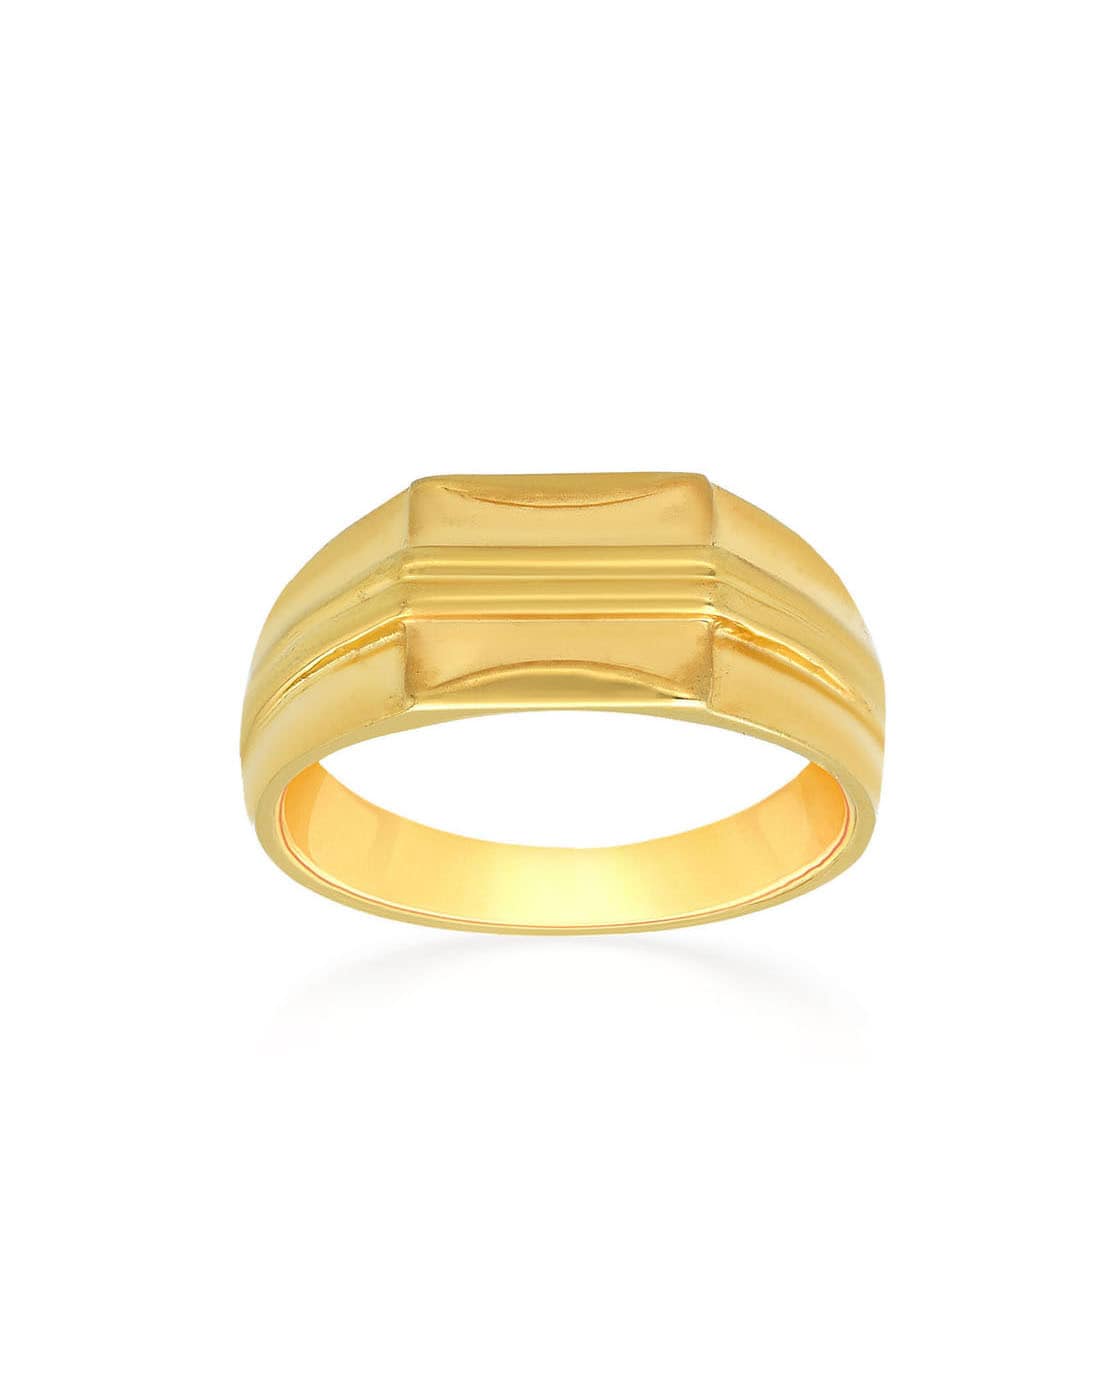 Buy 14K SOLID Plain Gold Ring Solid Gold Wedding Band 2mm, Men or Women  Sizes 3-13 Available Yellow Gold Rose Gold White Gold Facets & Karats  Online in India - Etsy